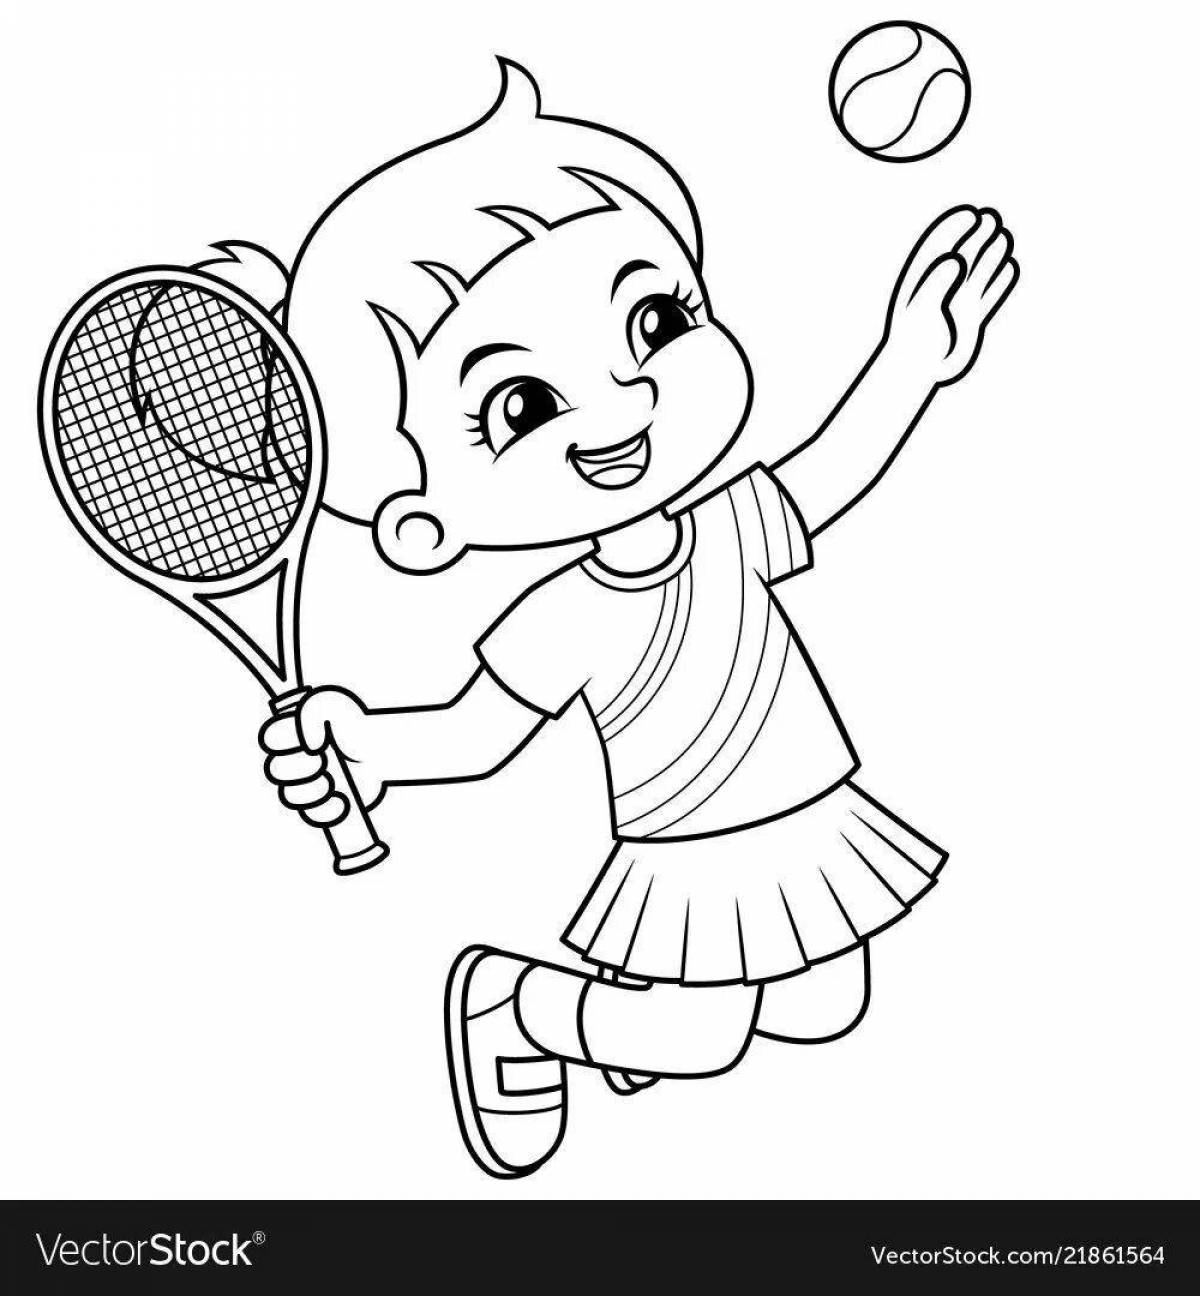 Outstanding tennis coloring book for kids